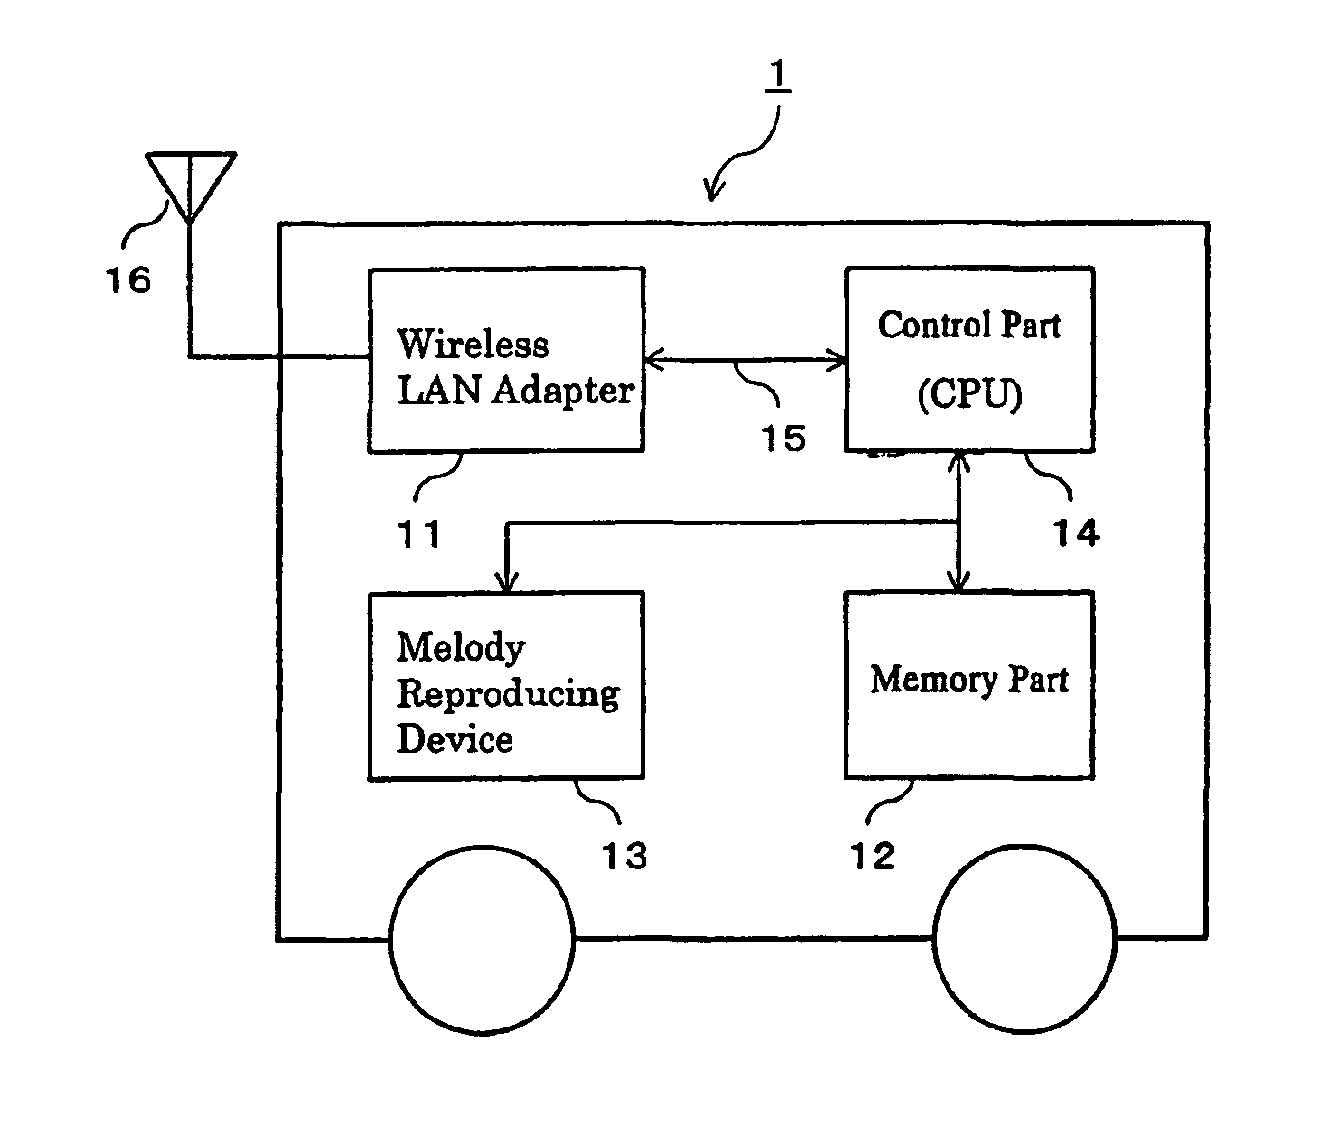 Automated guided vehicle, operation control system and method for the same, and automotive vehicle